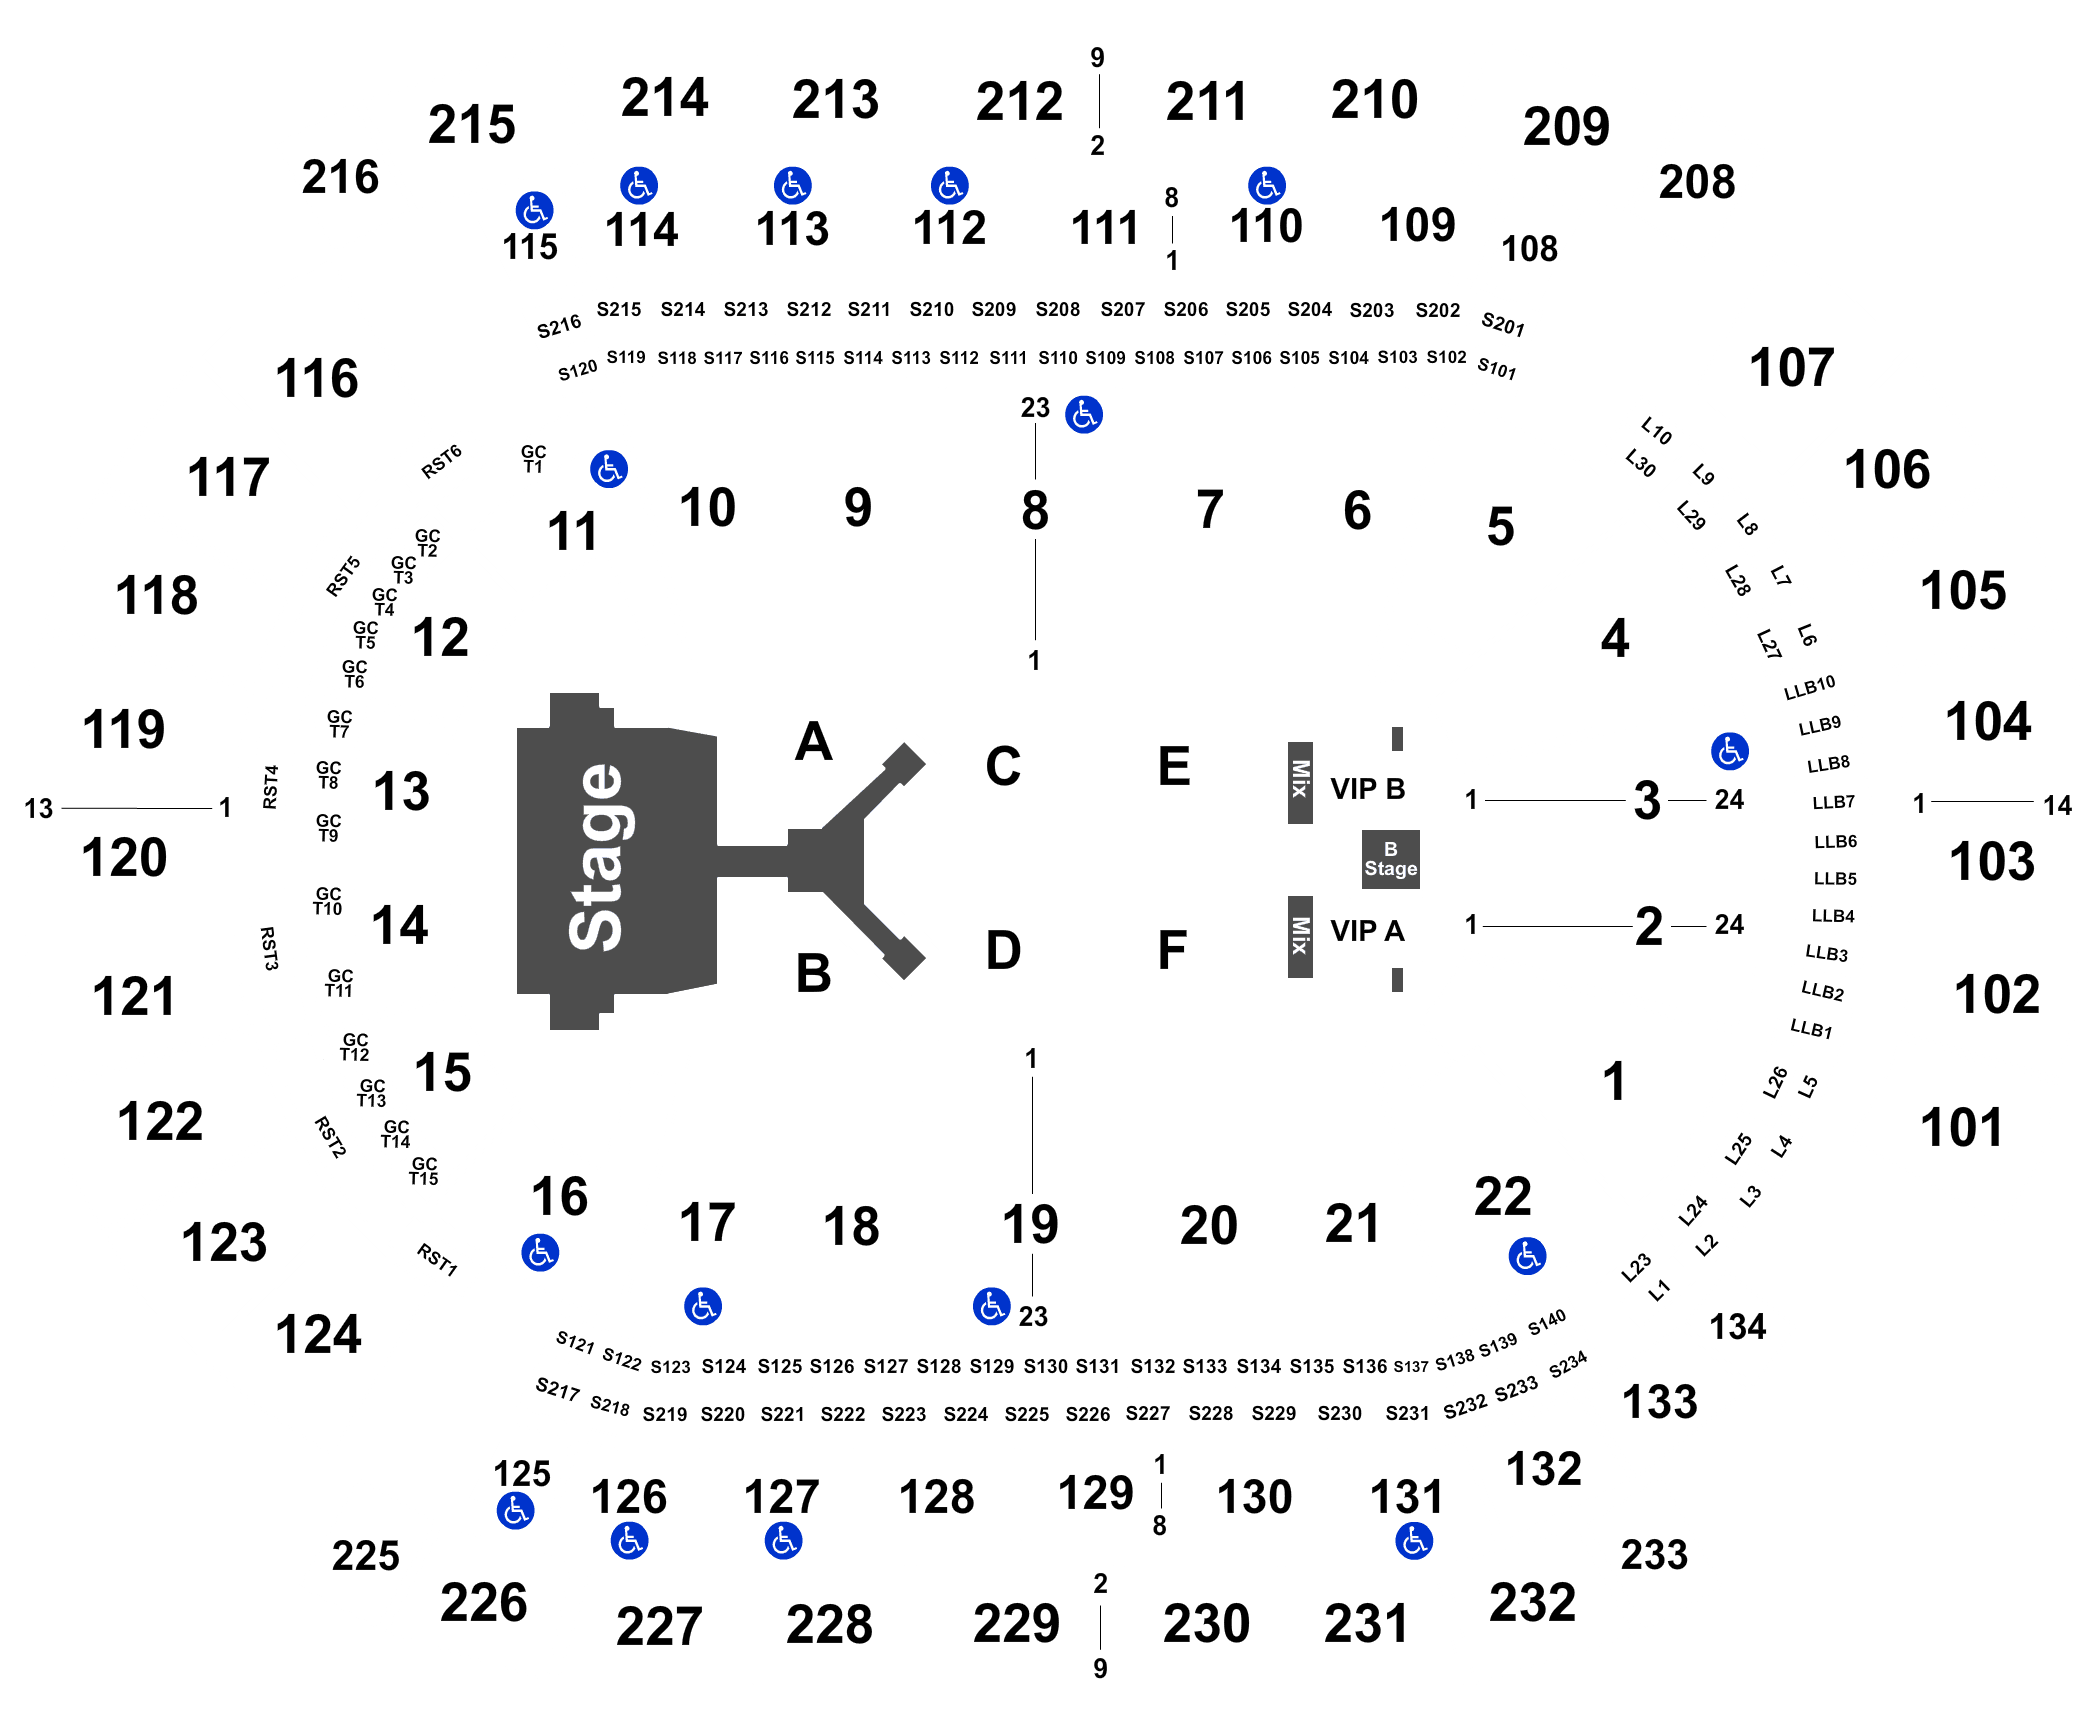 Prudential Center - Newark, NJ  Tickets, 2023-2024 Event Schedule, Seating  Chart